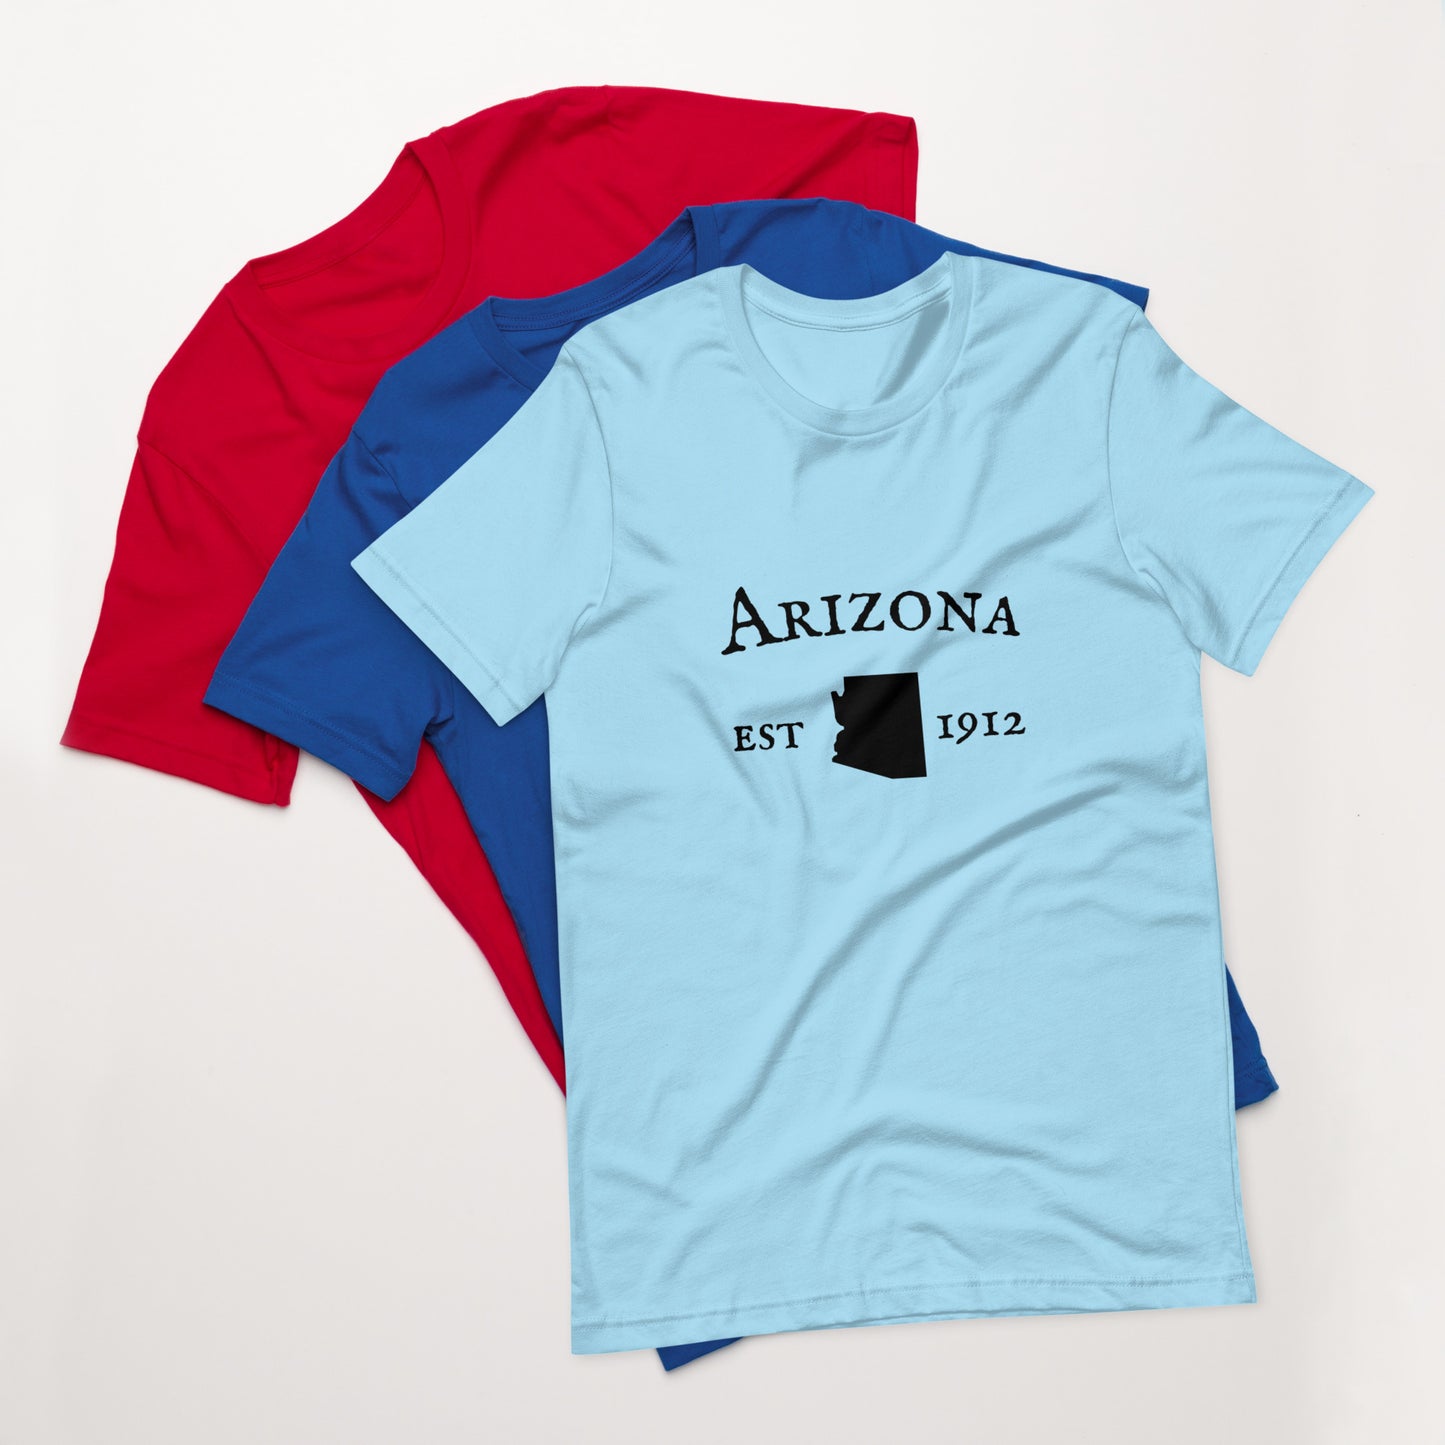 "Arizona Established In 1912" T-Shirt - Weave Got Gifts - Unique Gifts You Won’t Find Anywhere Else!